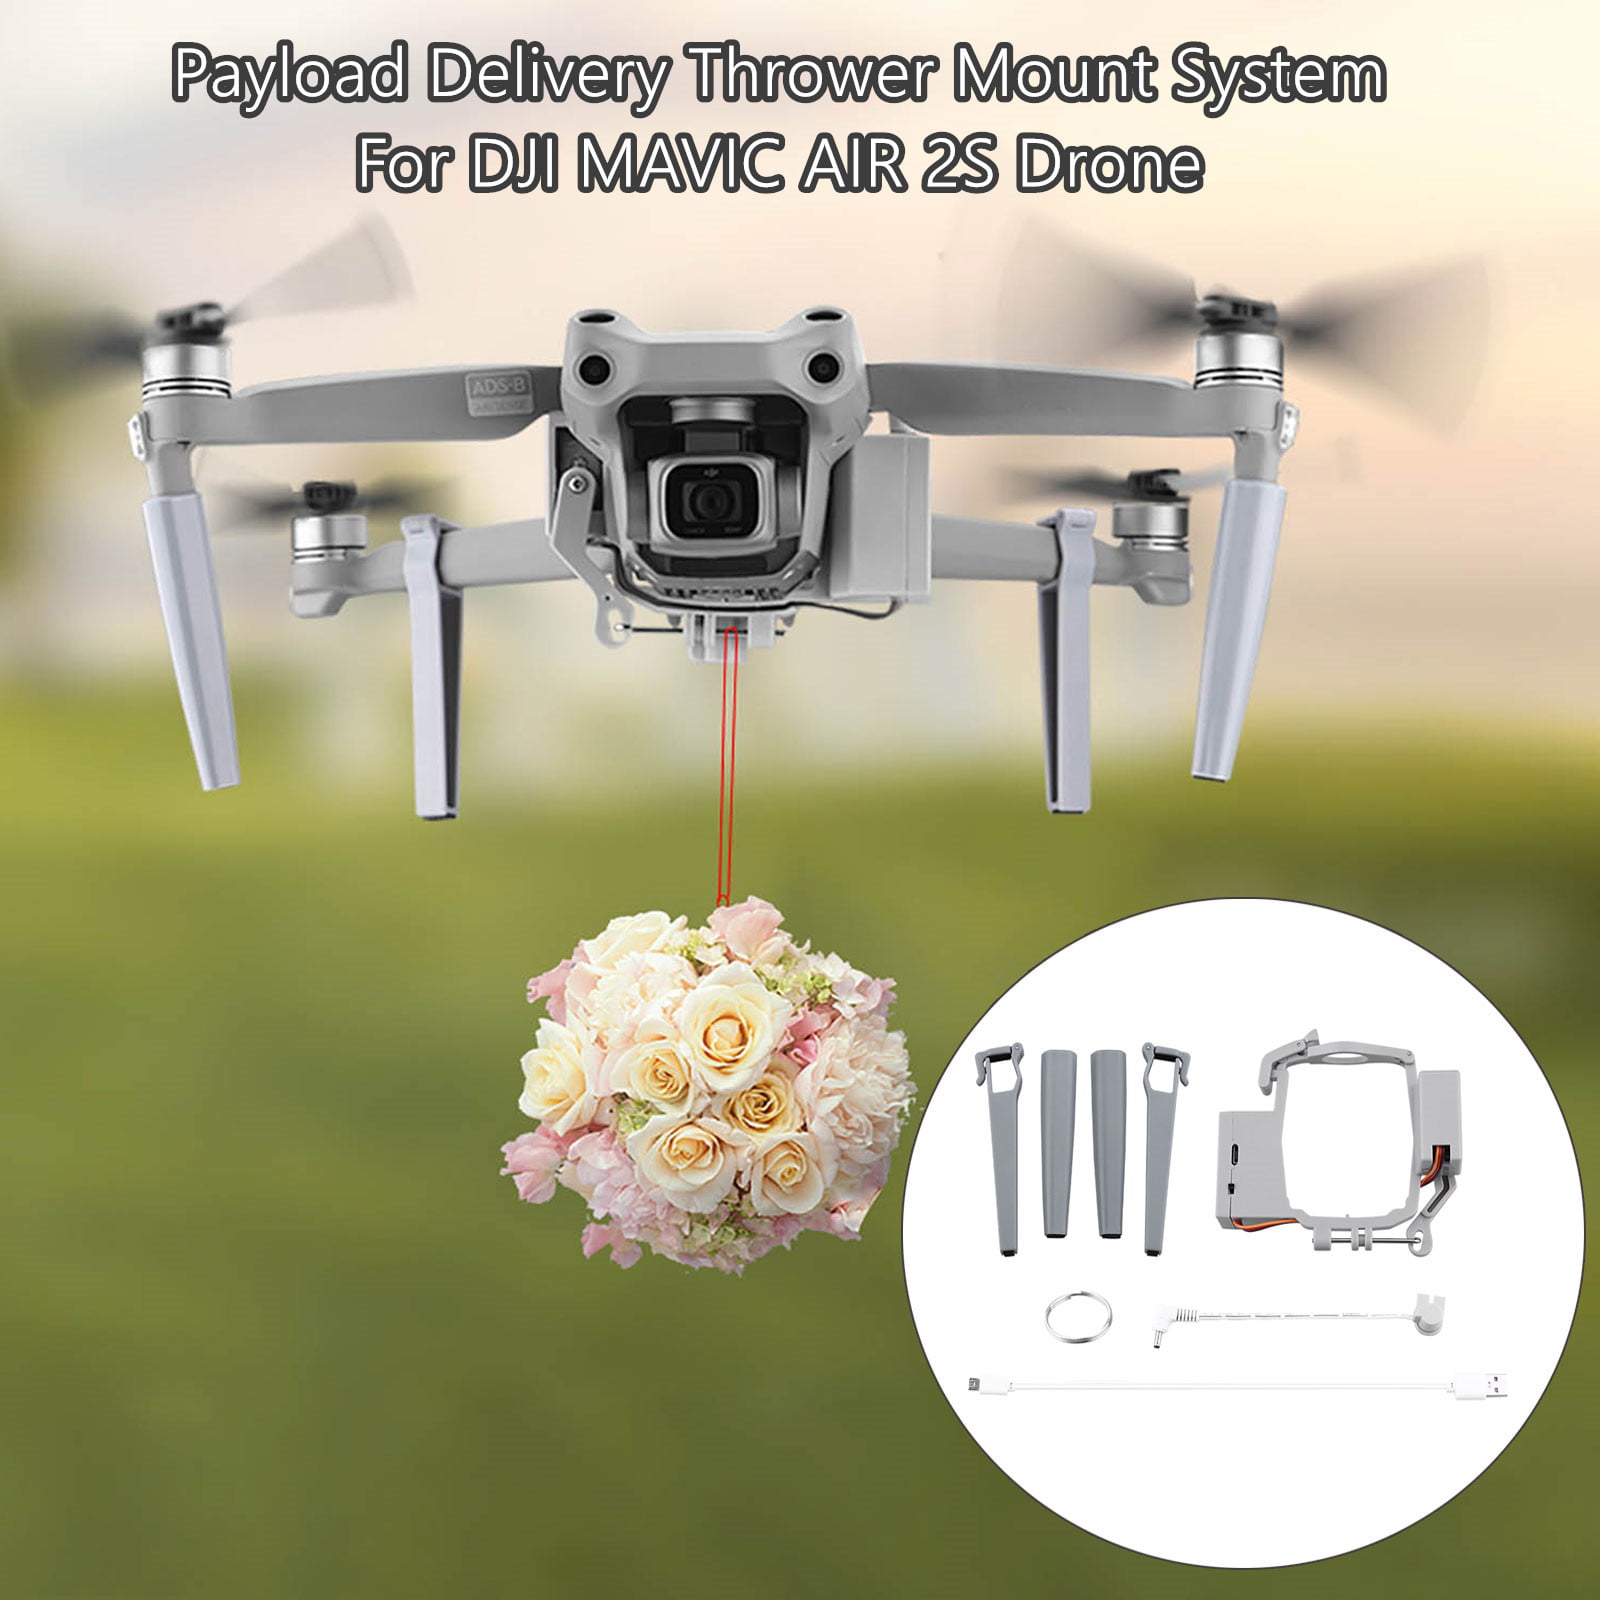 1109410 Payload Delivery Thrower Air Dropper Device Mount System For DJI AIR 2S